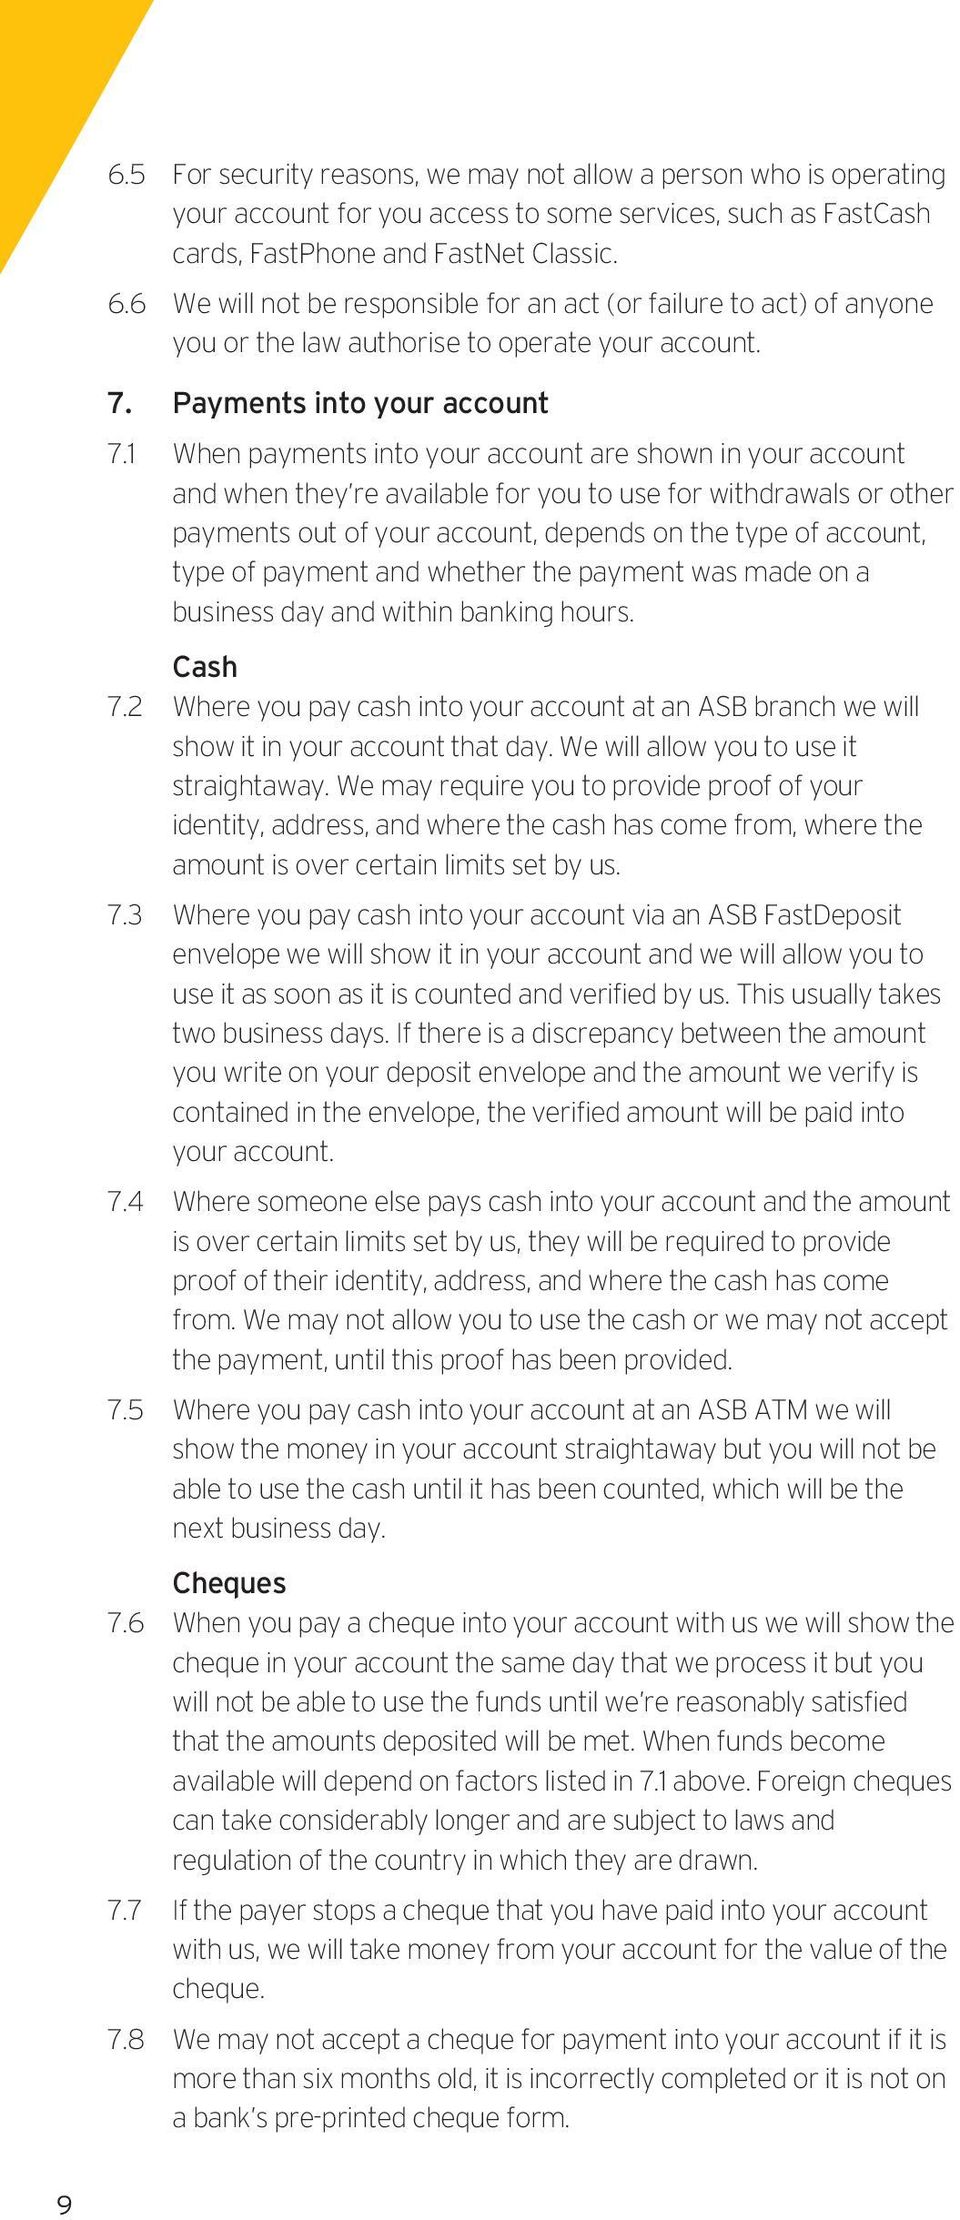 1 When payments into your account are shown in your account and when they re available for you to use for withdrawals or other payments out of your account, depends on the type of account, type of